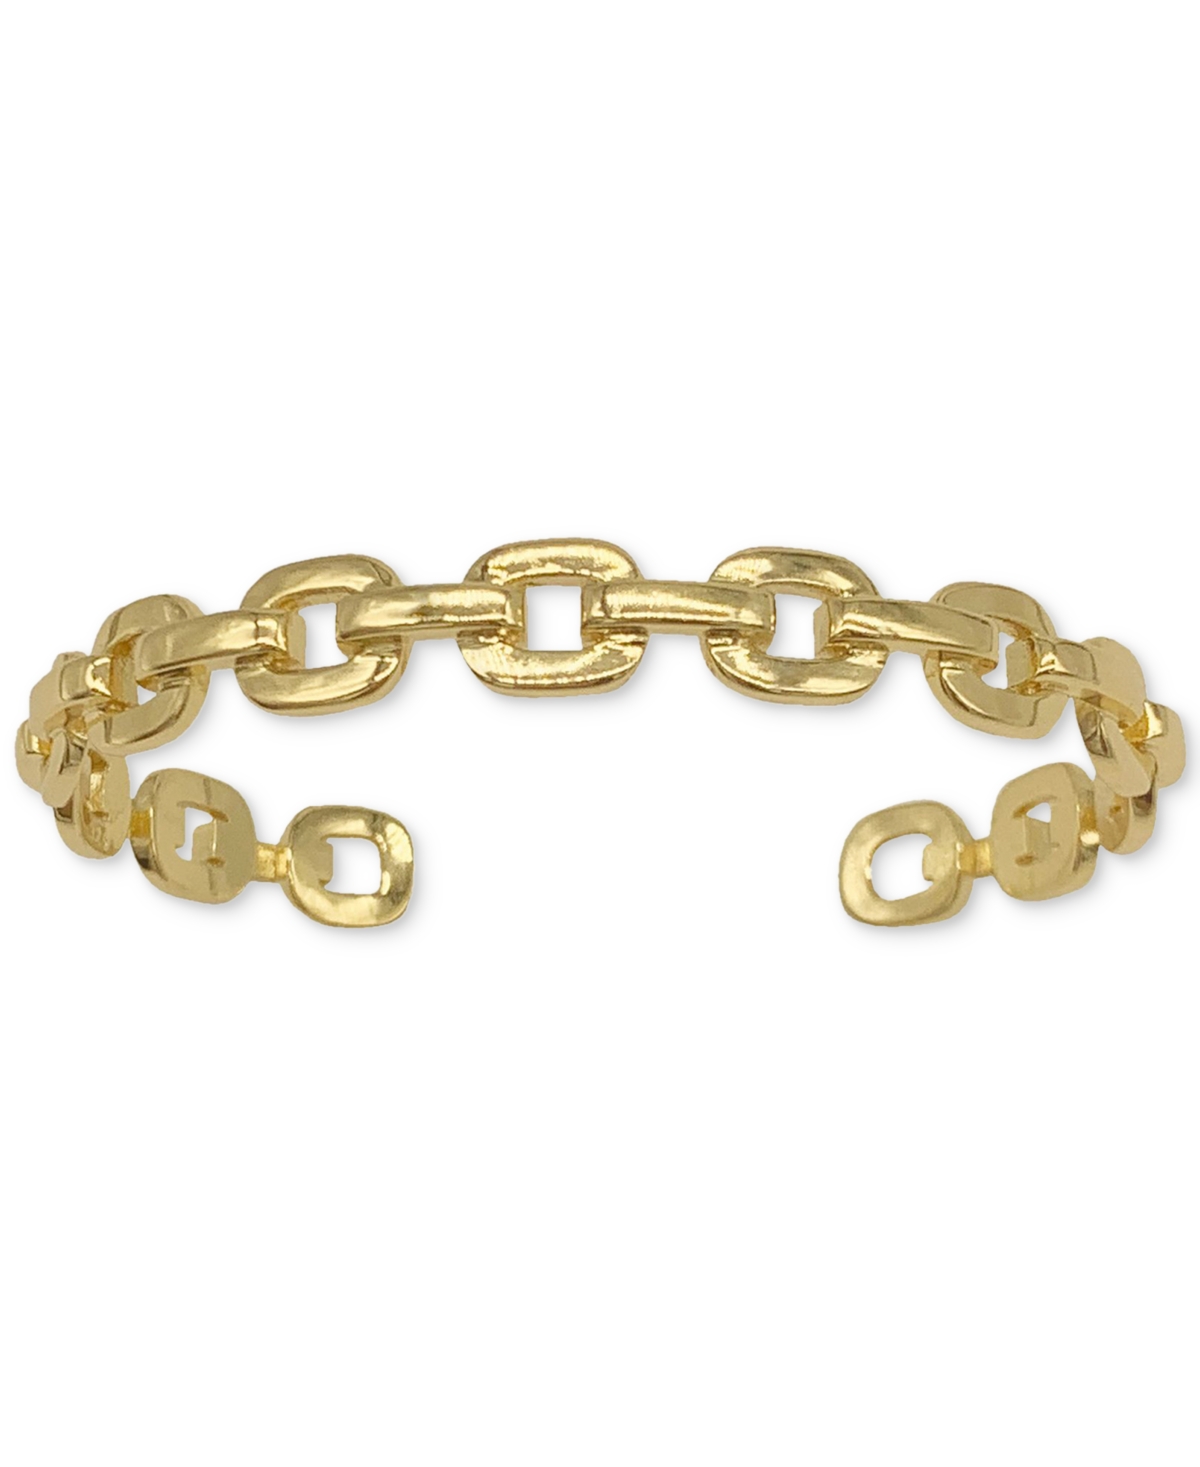 Adornia 14k Gold-plated Chain Link Cuff Bracelet